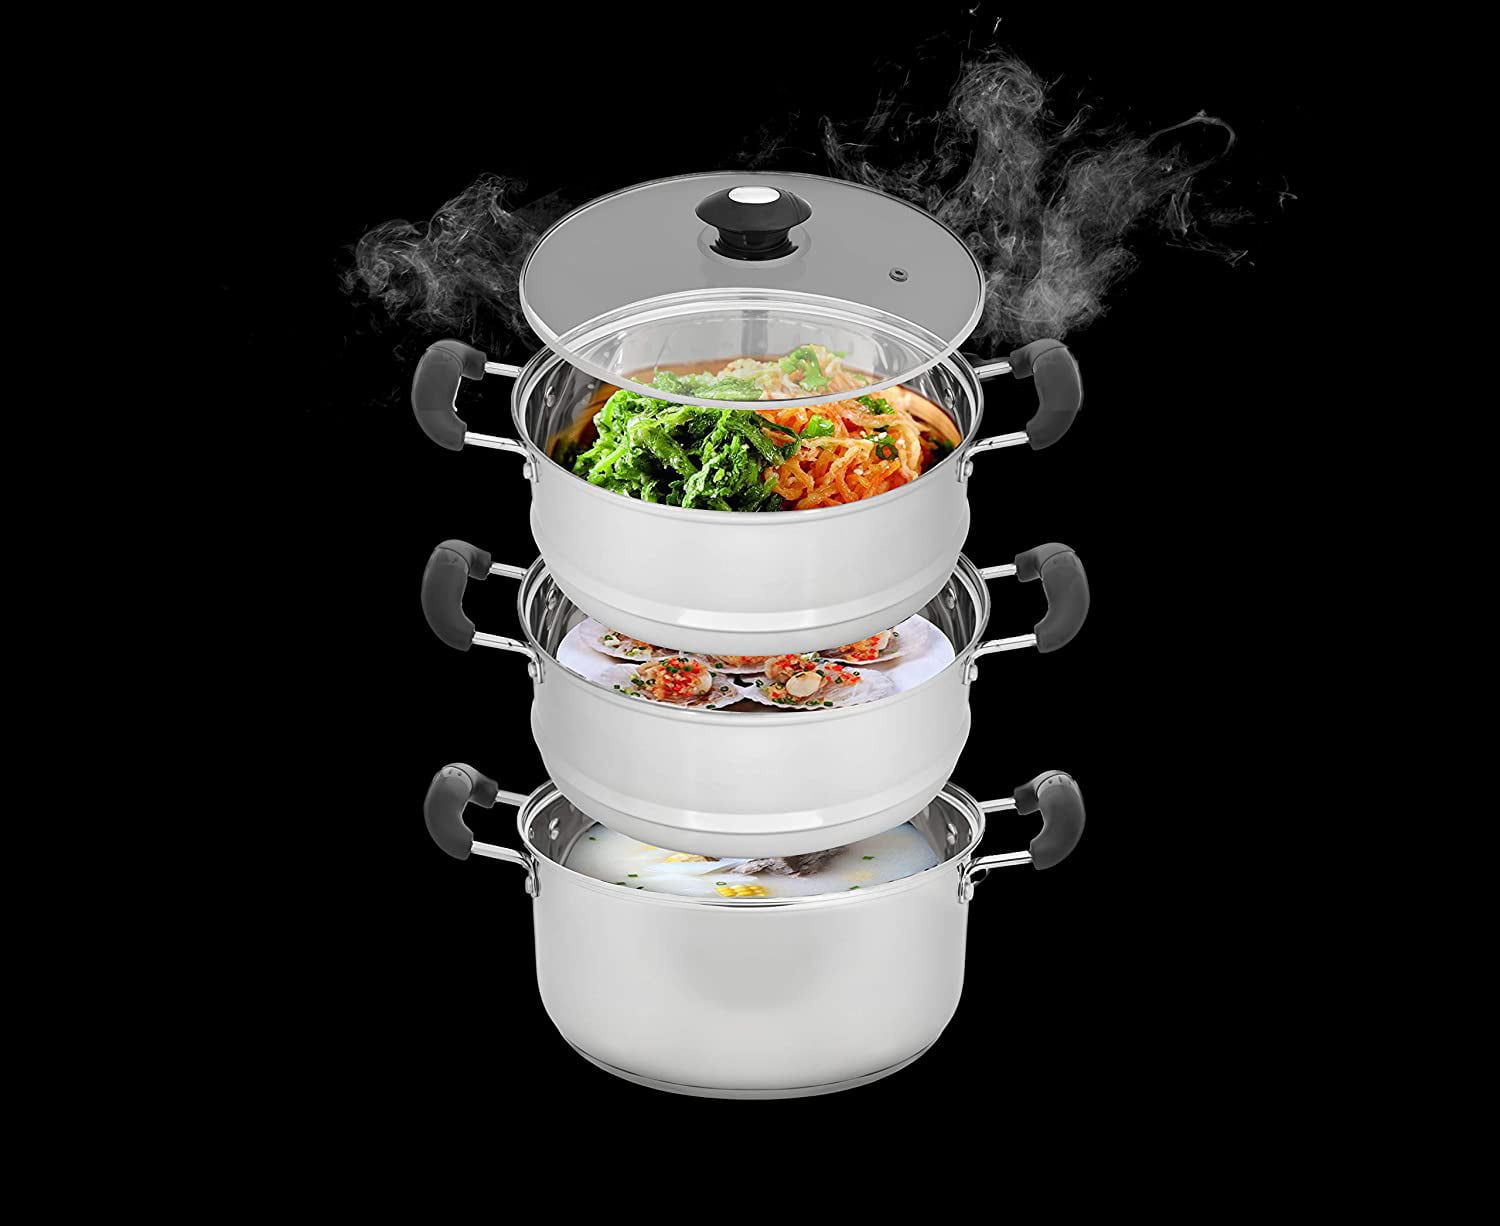 Concord concord extra large outdoor stainless steel stock pot steamer and  braiser combo. great for steaming oysters, crab, crawfish a